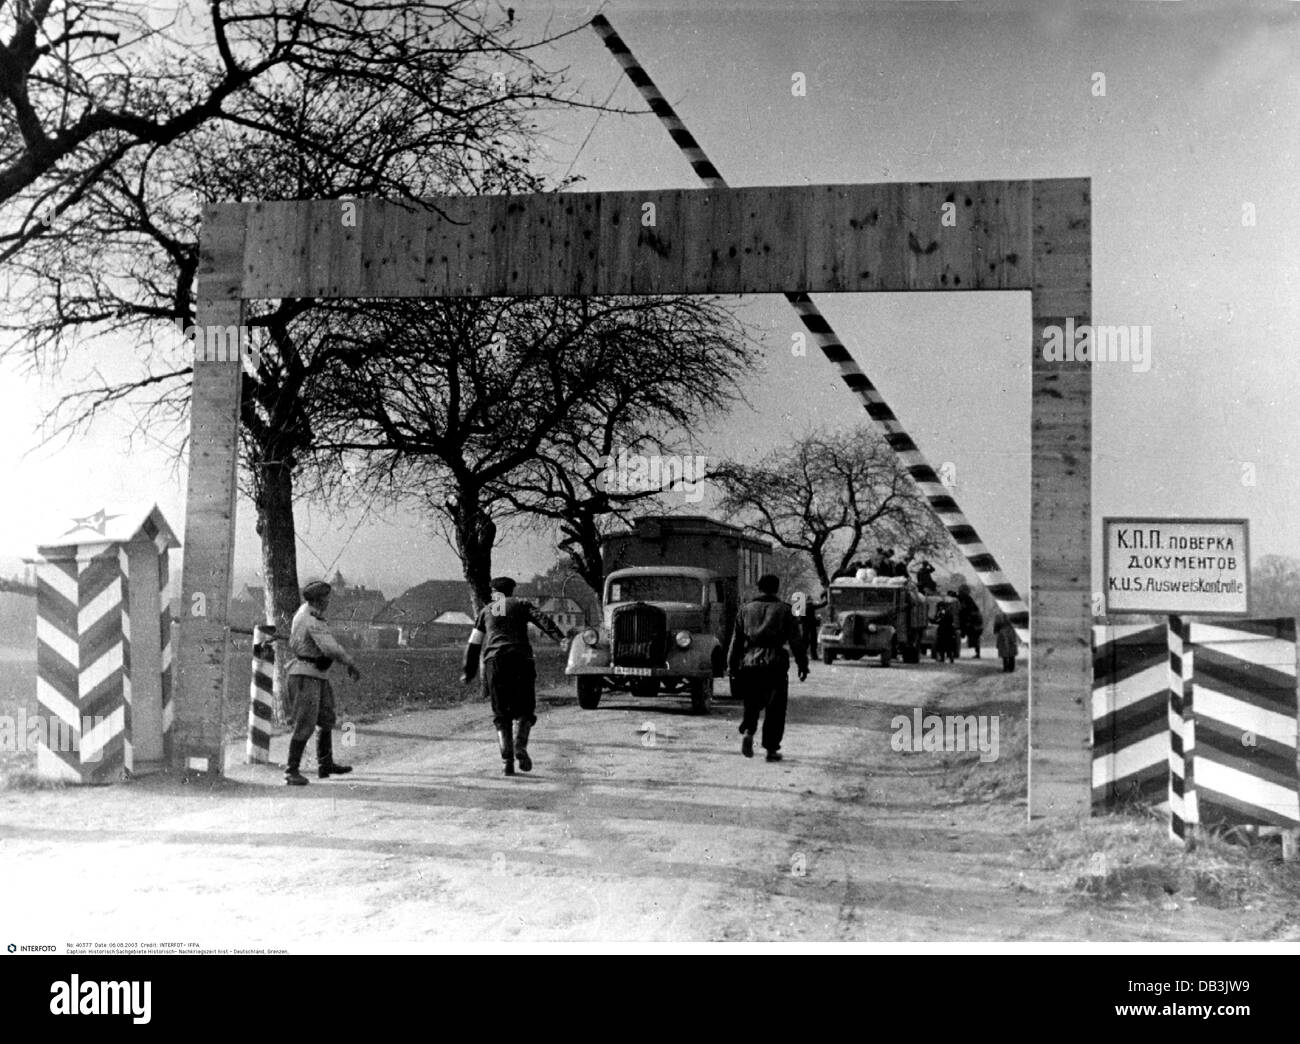 postwar period, Germany, borders, Soviet guards at the border of the American zone of occupation, arrival of a convoy with repatriates, circa 1946, Additional-Rights-Clearences-Not Available Stock Photo